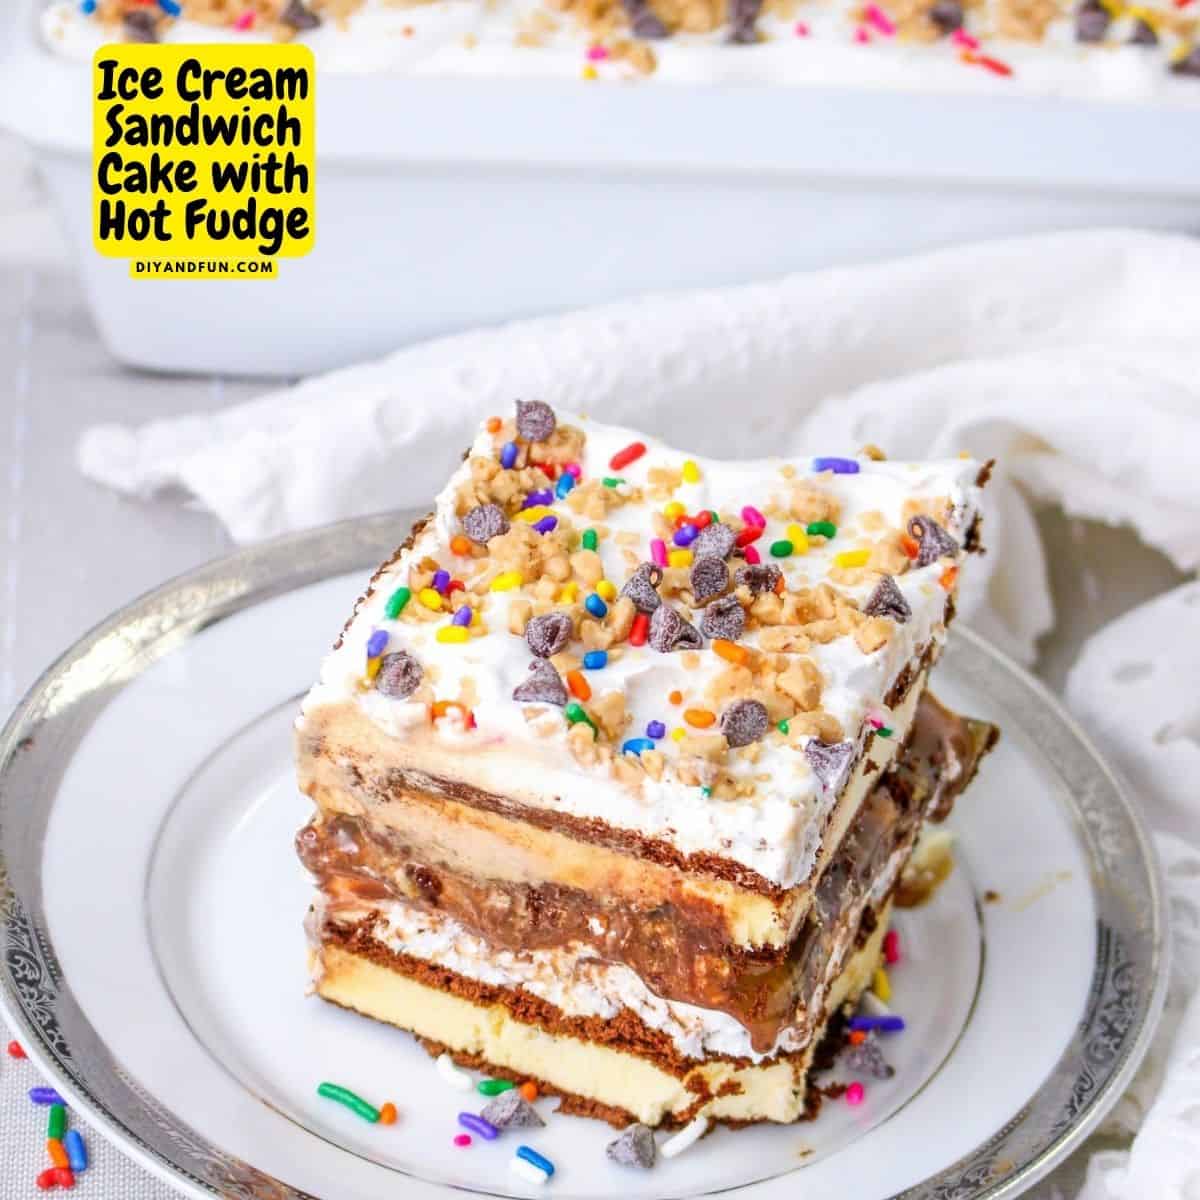 Ice Cream Sandwich Cake with Hot Fudge, a simple and delicious no bake dessert that can be made in about ten minutes.